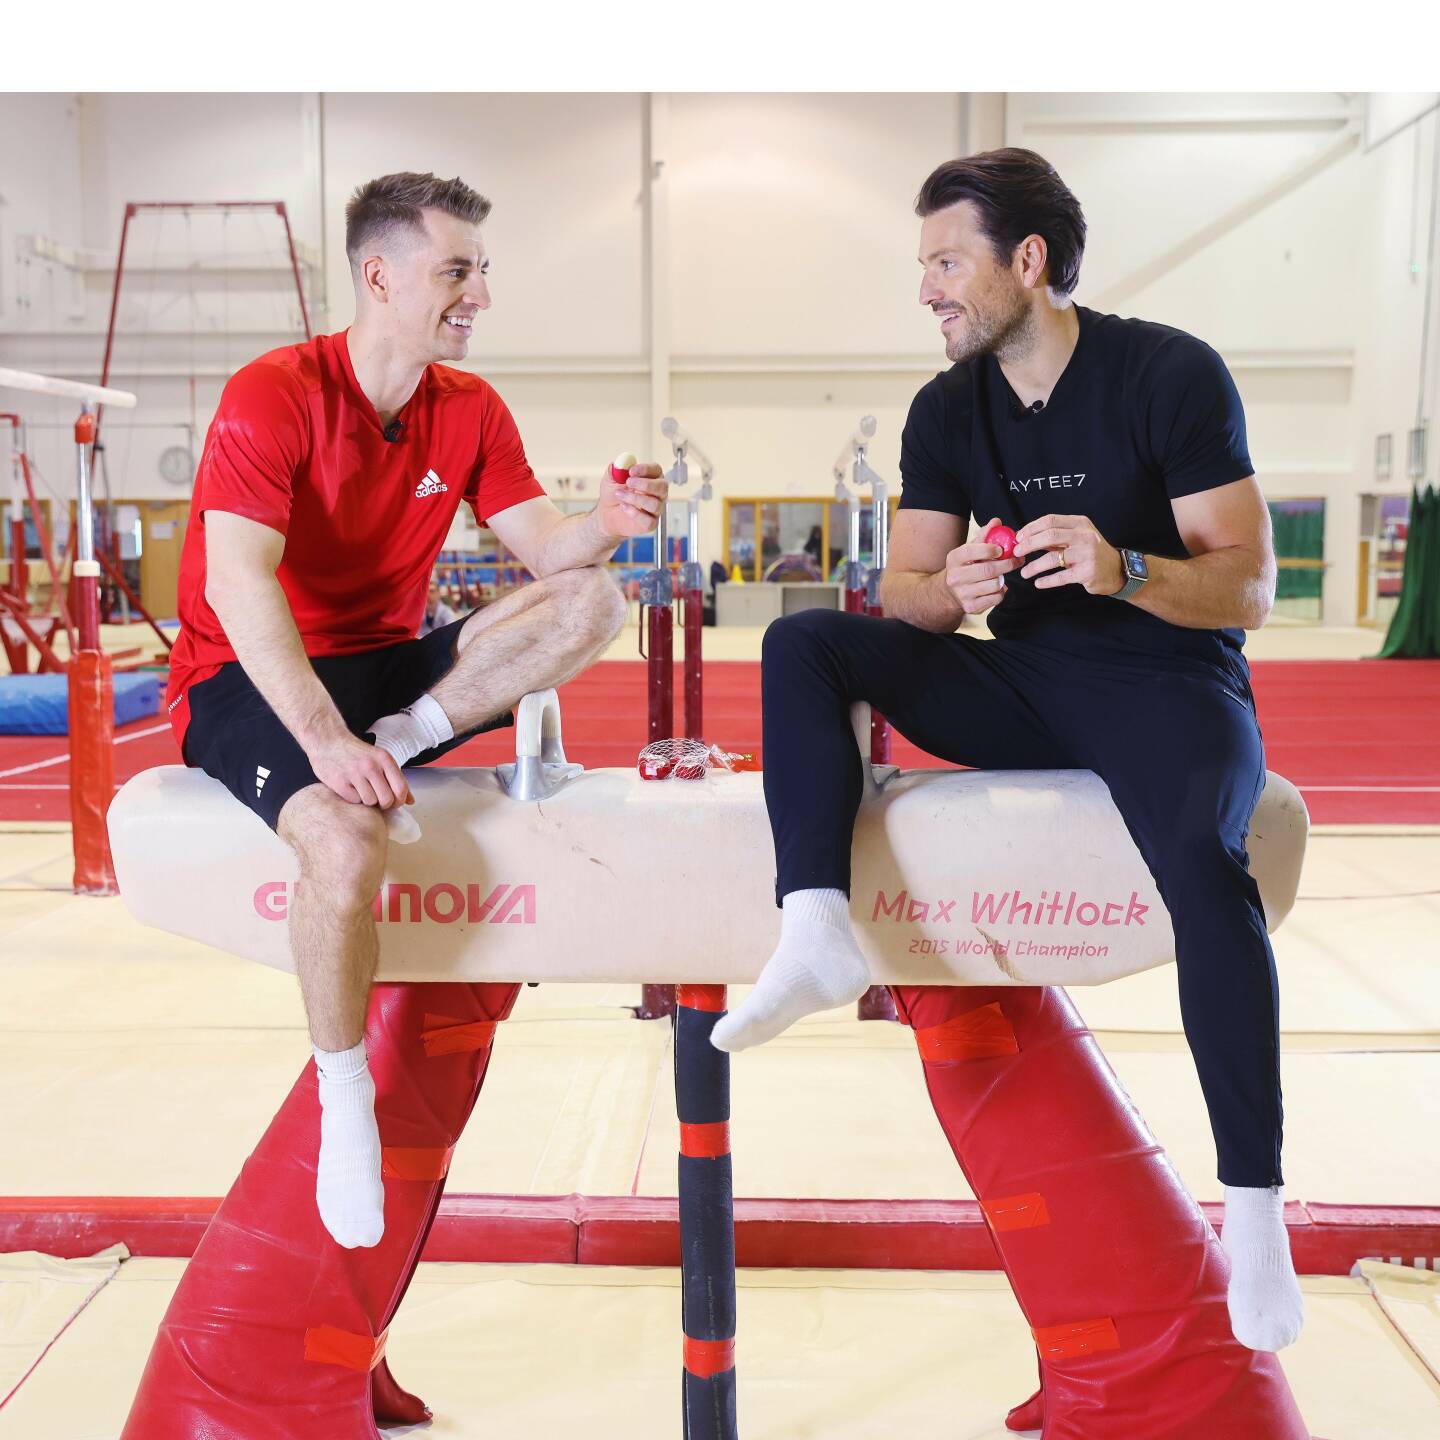 Max Whitlock and Mark Wright sit on a pummel horse and have a chat while eating Babybel cheese.